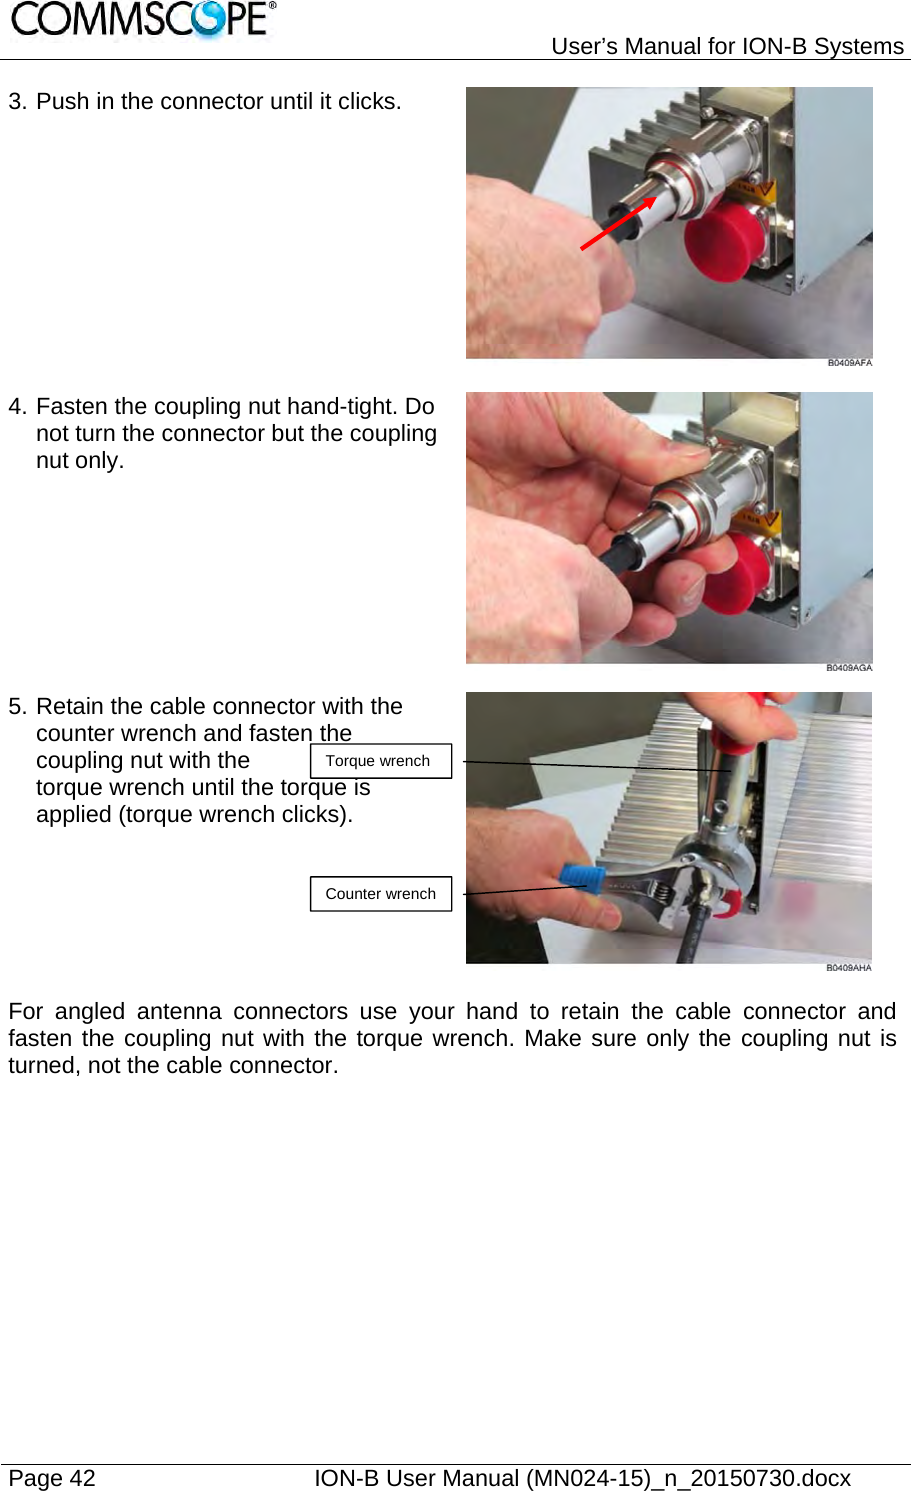   User’s Manual for ION-B Systems Page 42    ION-B User Manual (MN024-15)_n_20150730.docx  3. Push in the connector until it clicks.   4. Fasten the coupling nut hand-tight. Do not turn the connector but the coupling nut only.  5. Retain the cable connector with the counter wrench and fasten the coupling nut with the  torque wrench until the torque is applied (torque wrench clicks).   For angled antenna connectors use your hand to retain the cable connector and fasten the coupling nut with the torque wrench. Make sure only the coupling nut is turned, not the cable connector.  Torque wrench Counter wrench 